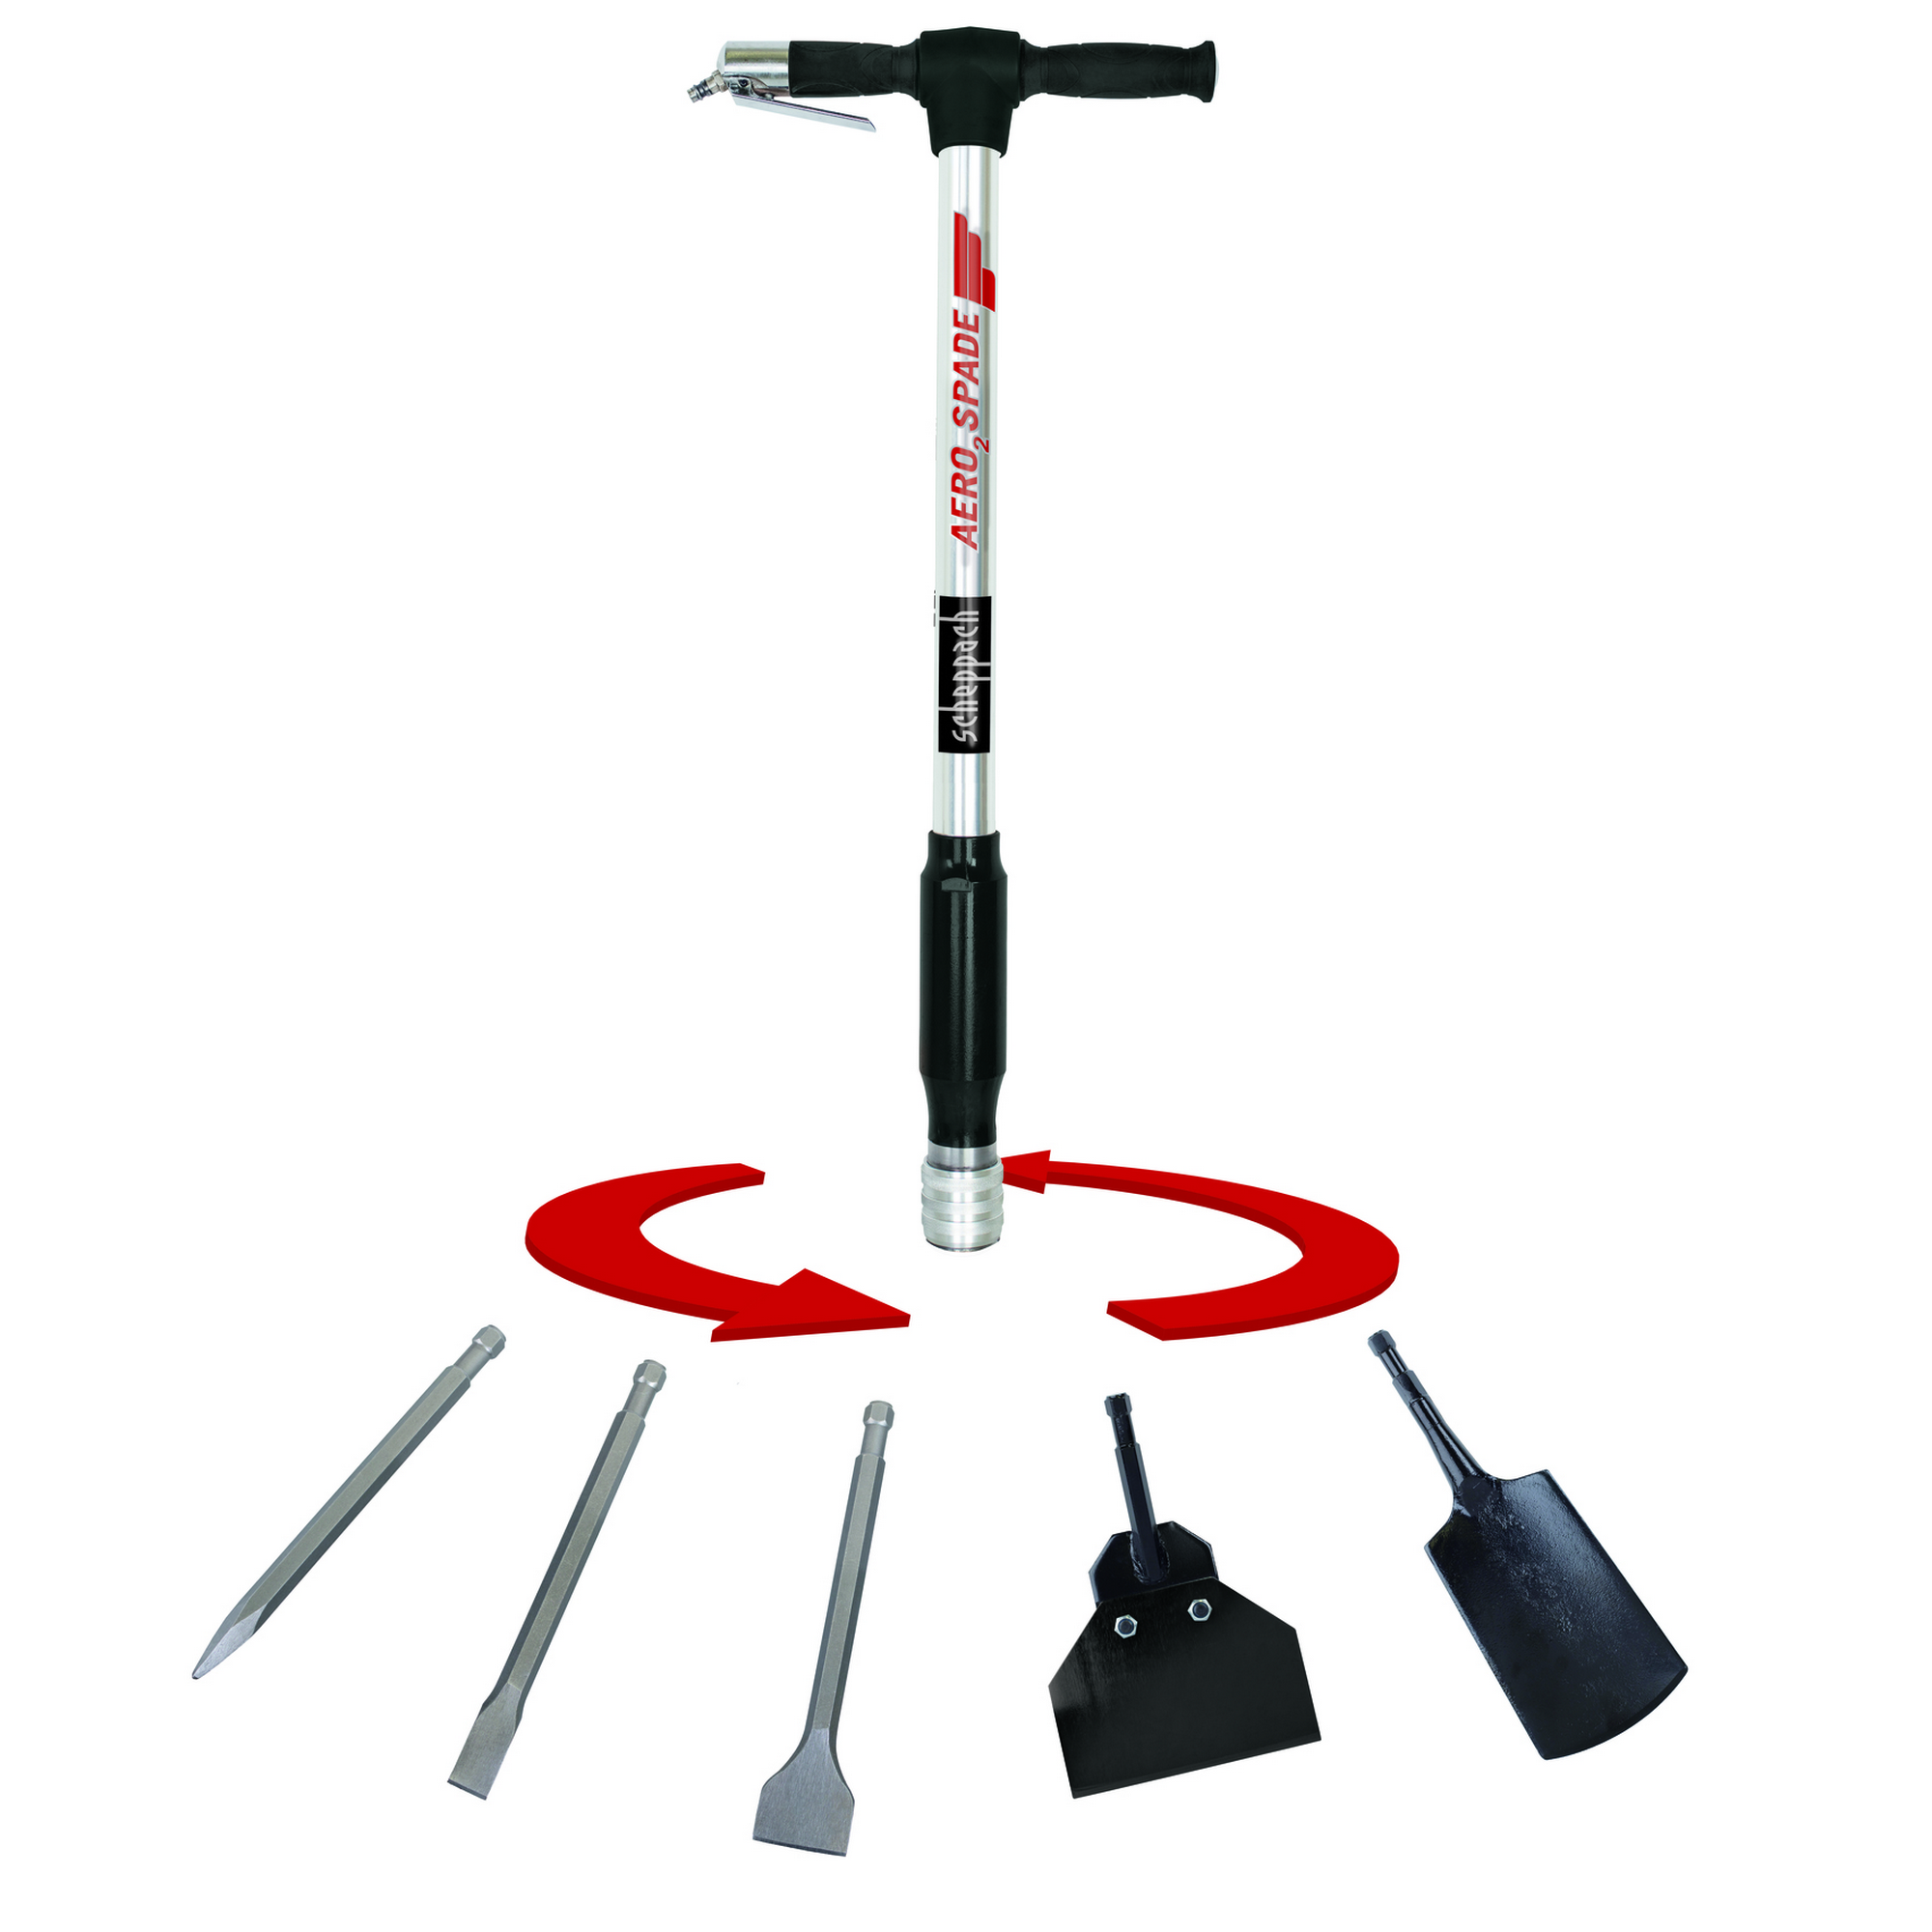 Scheppach 5-in-1-Multitool 'Aero 2 Spade' + product picture